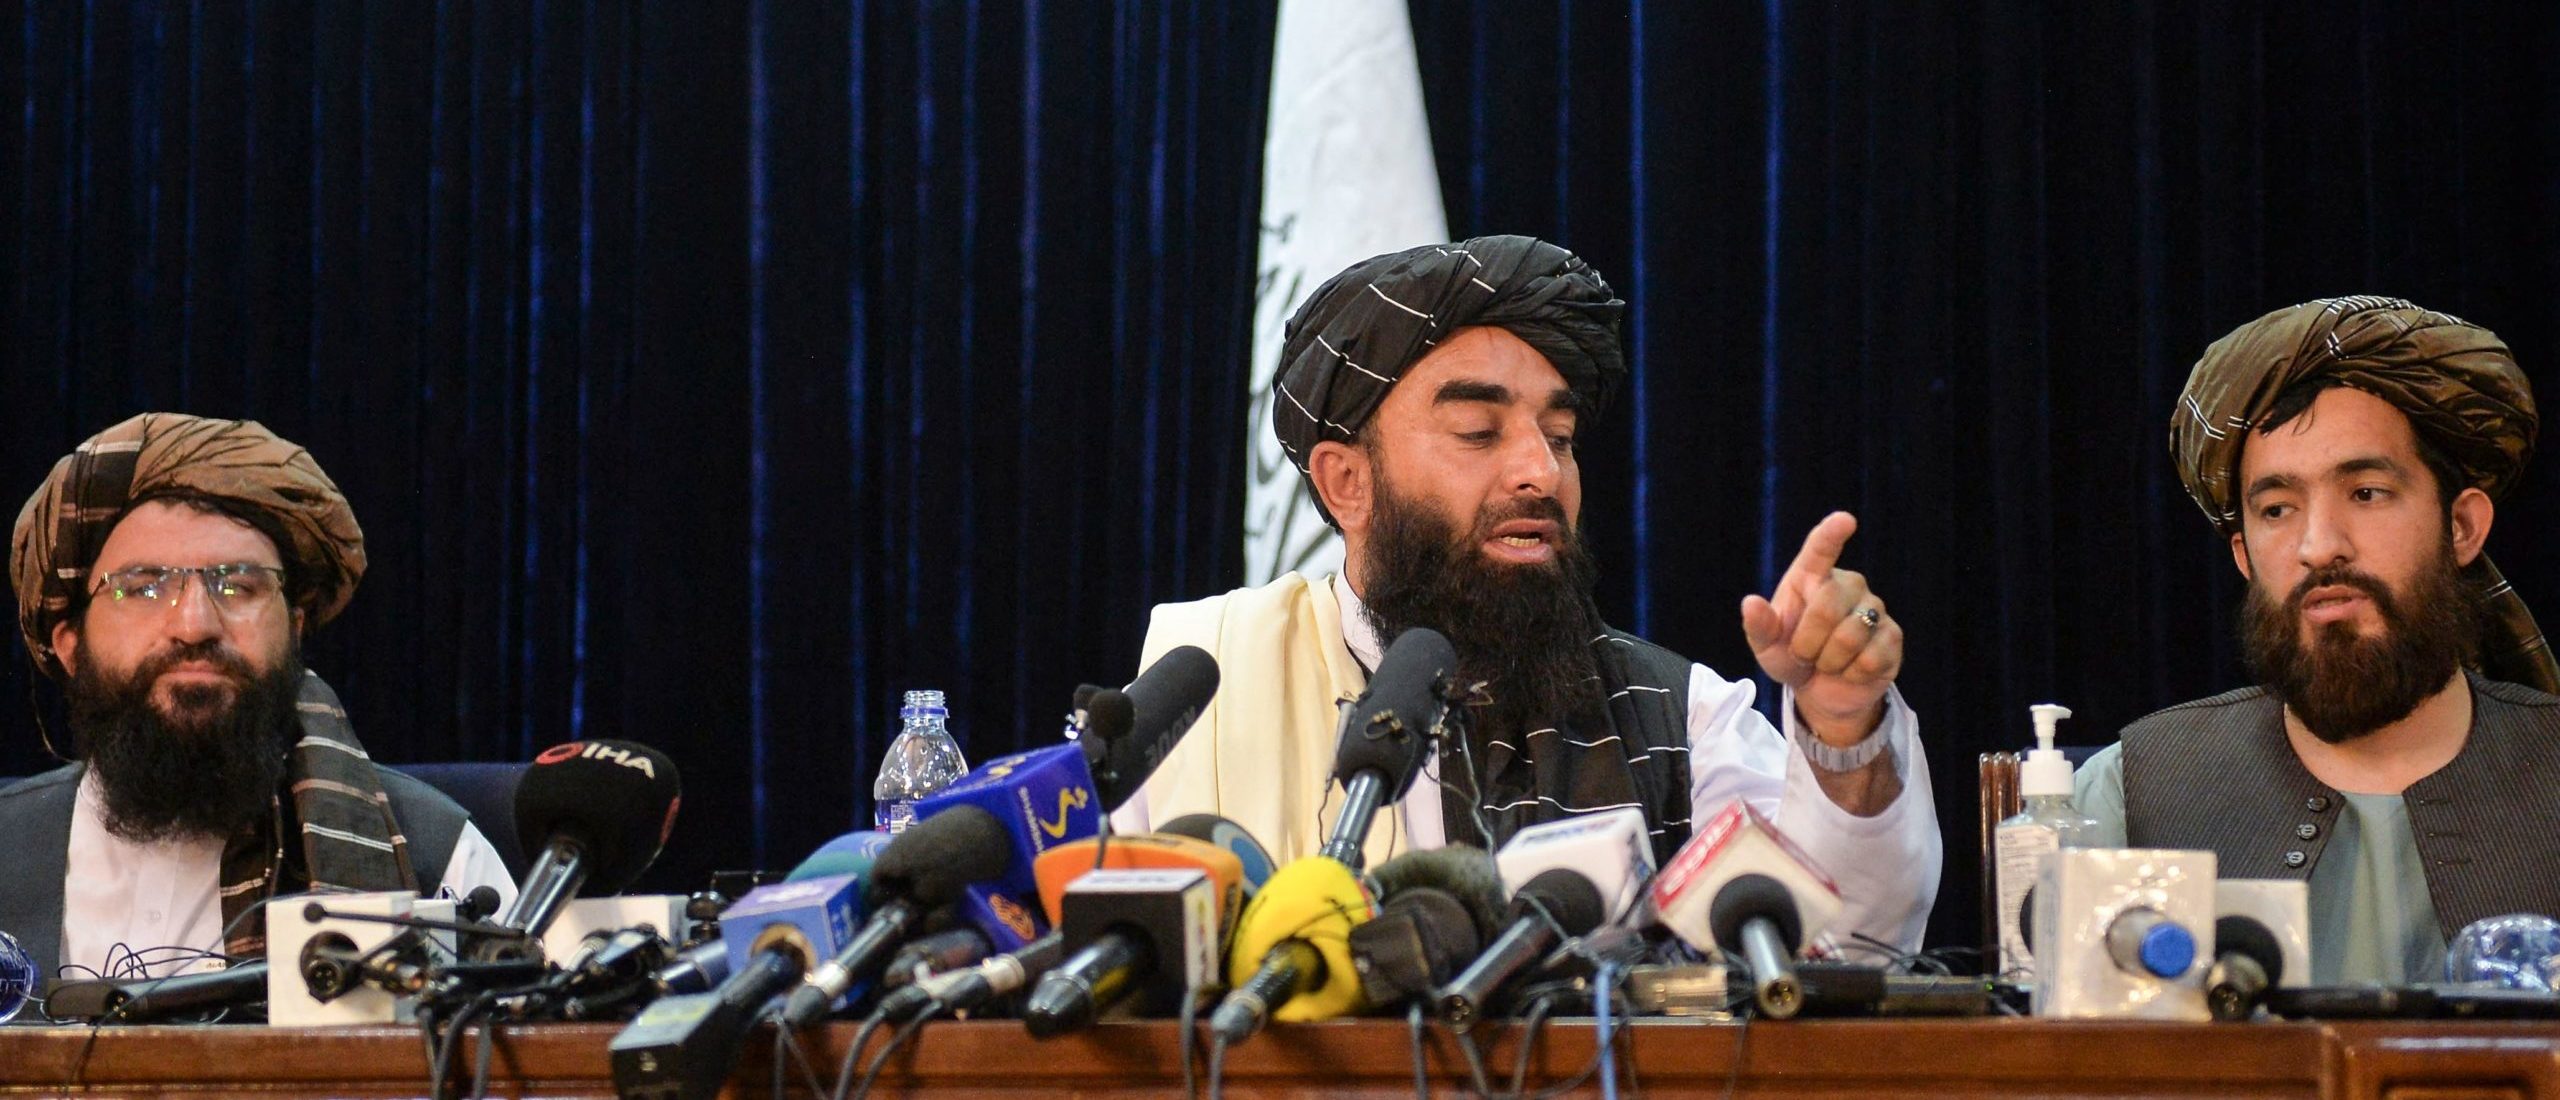 TOPSHOT - Taliban spokesperson Zabihullah Mujahid (C) gestures as he addresses the first press conference in Kabul on August 17, 2021 following the Taliban stunning takeover of Afghanistan. (Photo by Hoshang Hashimi / AFP) (Photo by HOSHANG HASHIMI/AFP via Getty Images)